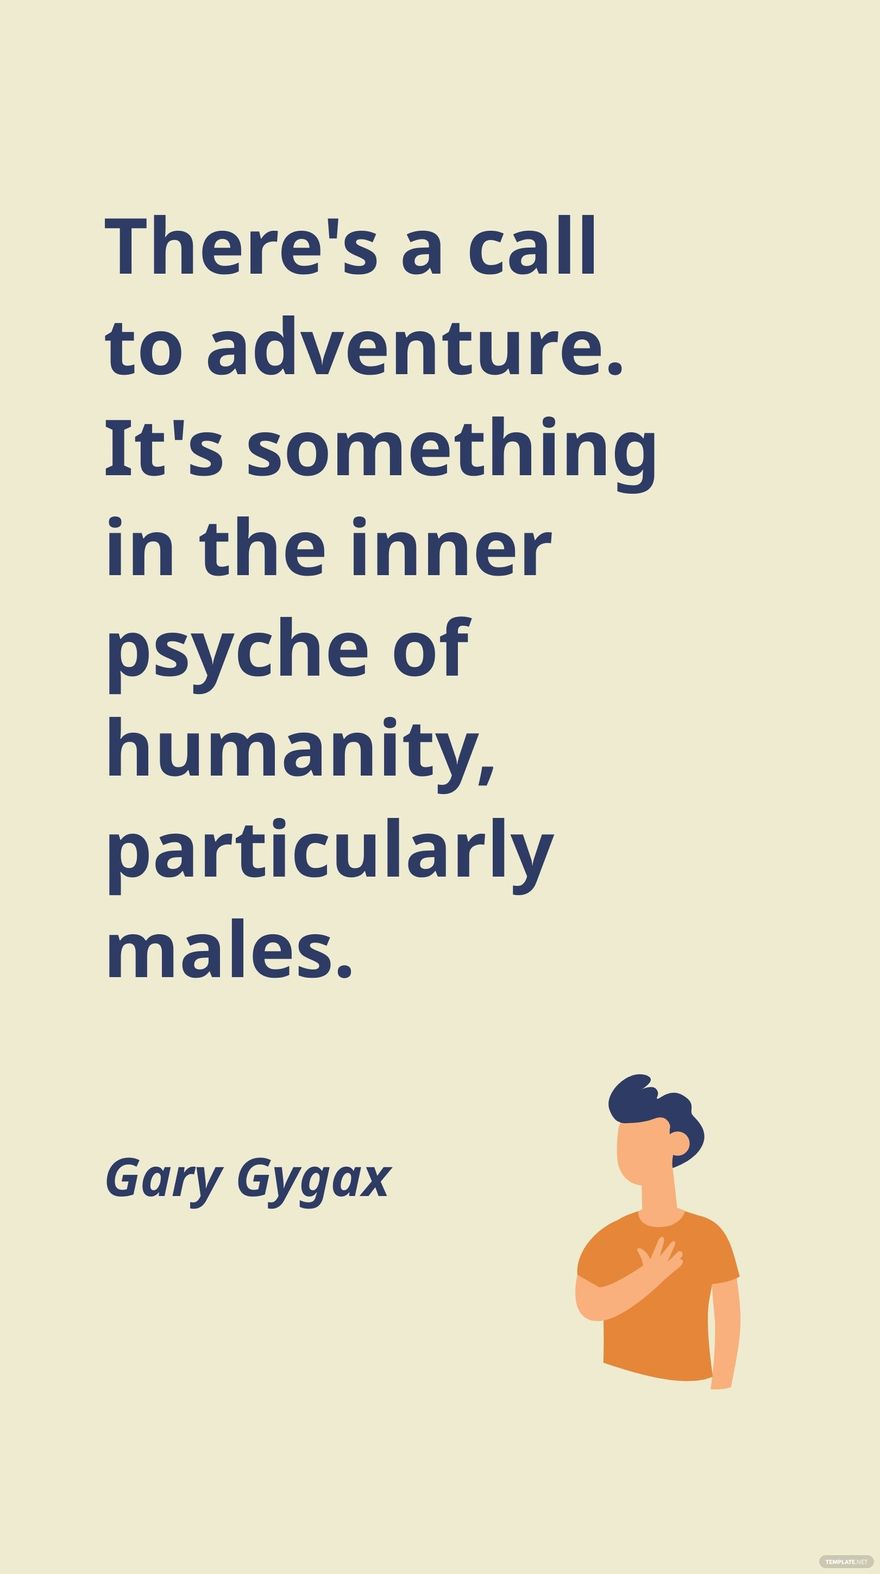 Gary Gygax - There's a call to adventure. It's something in the inner psyche of humanity, particularly males. in JPG